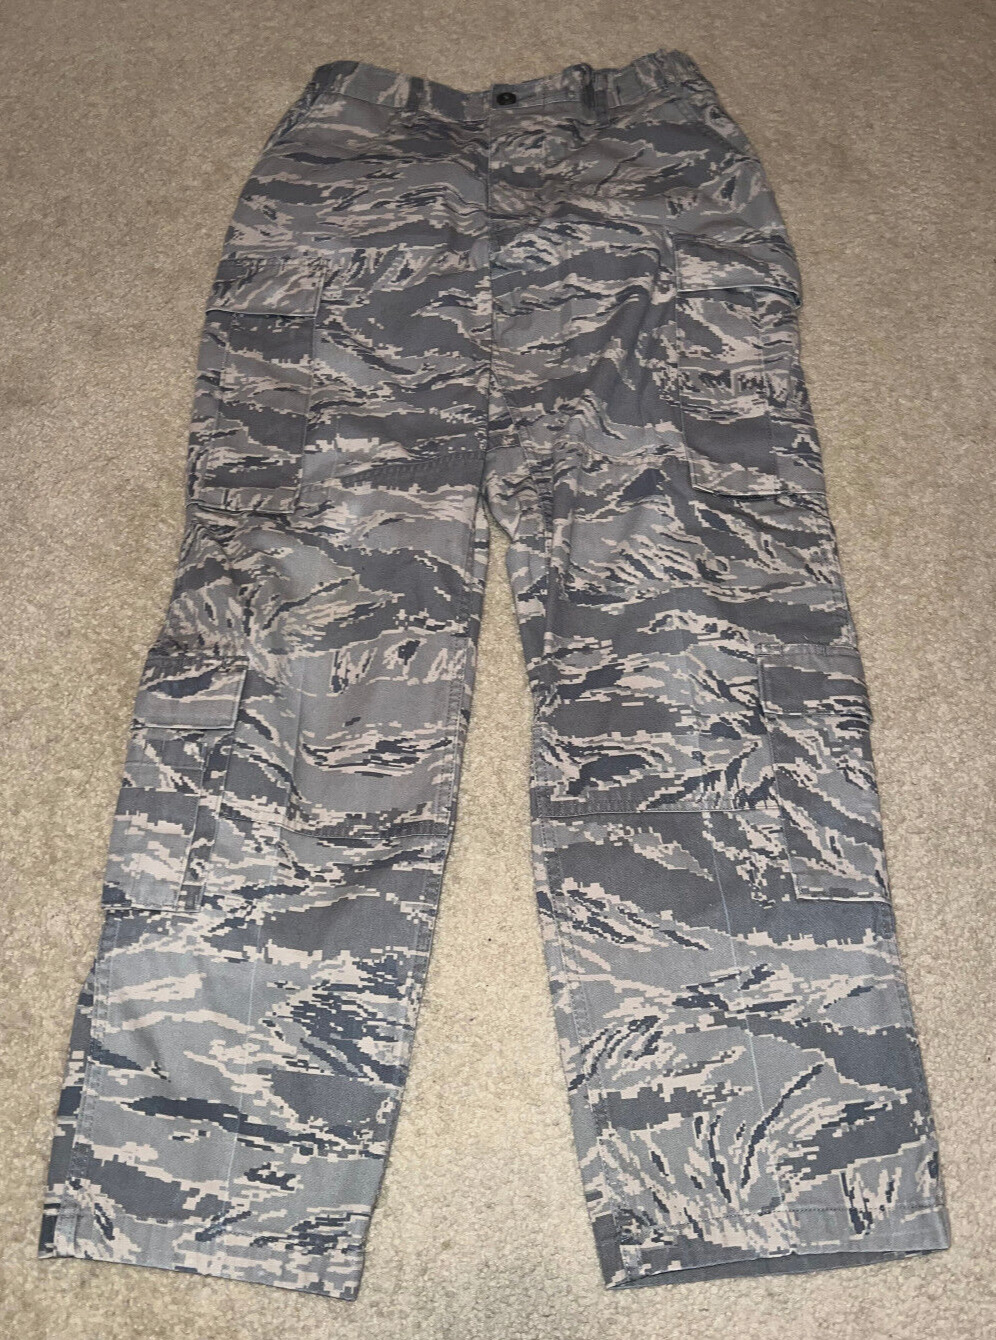 US Air Force Military TIGER Digital Camouflage Pants 32 SHORT - 8415-01-536-3830